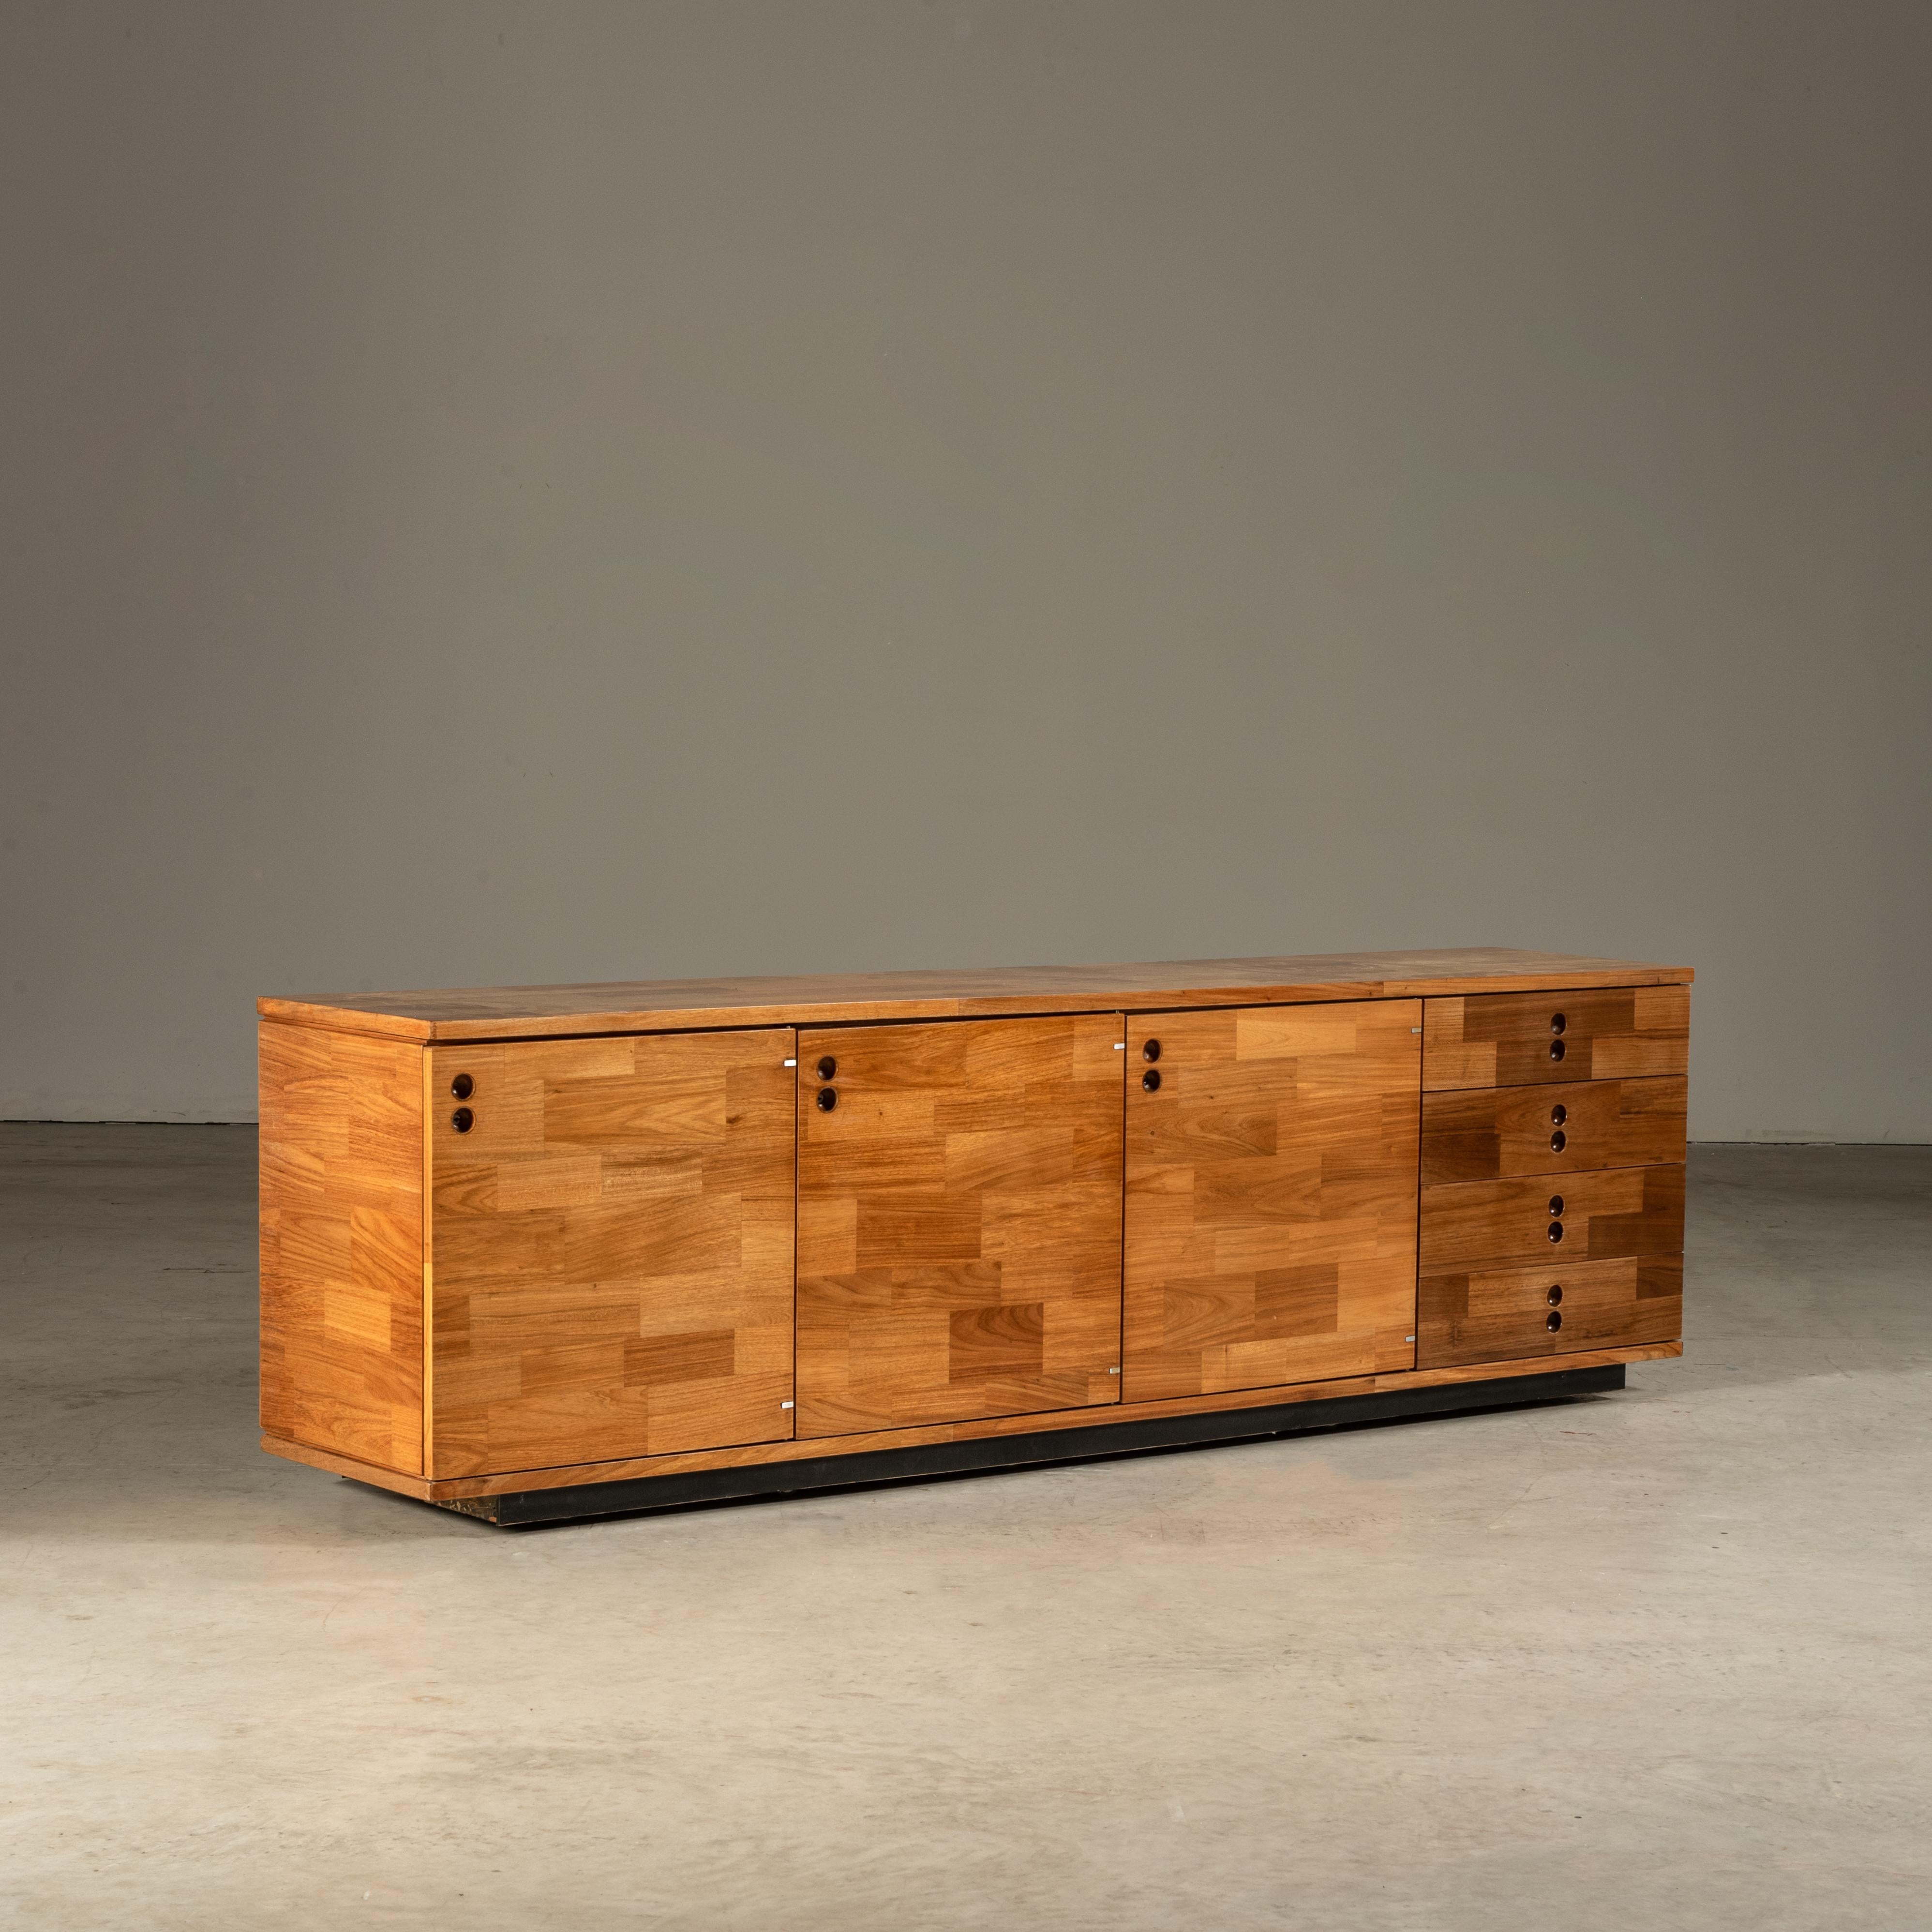 This exquisite sideboard, a creation of the renowned designer Jorge Zalszupin, epitomizes the elegance of Brazilian mid-century modern design. It is masterfully crafted from a selection of tropical hardwood, a material choice that not only honors